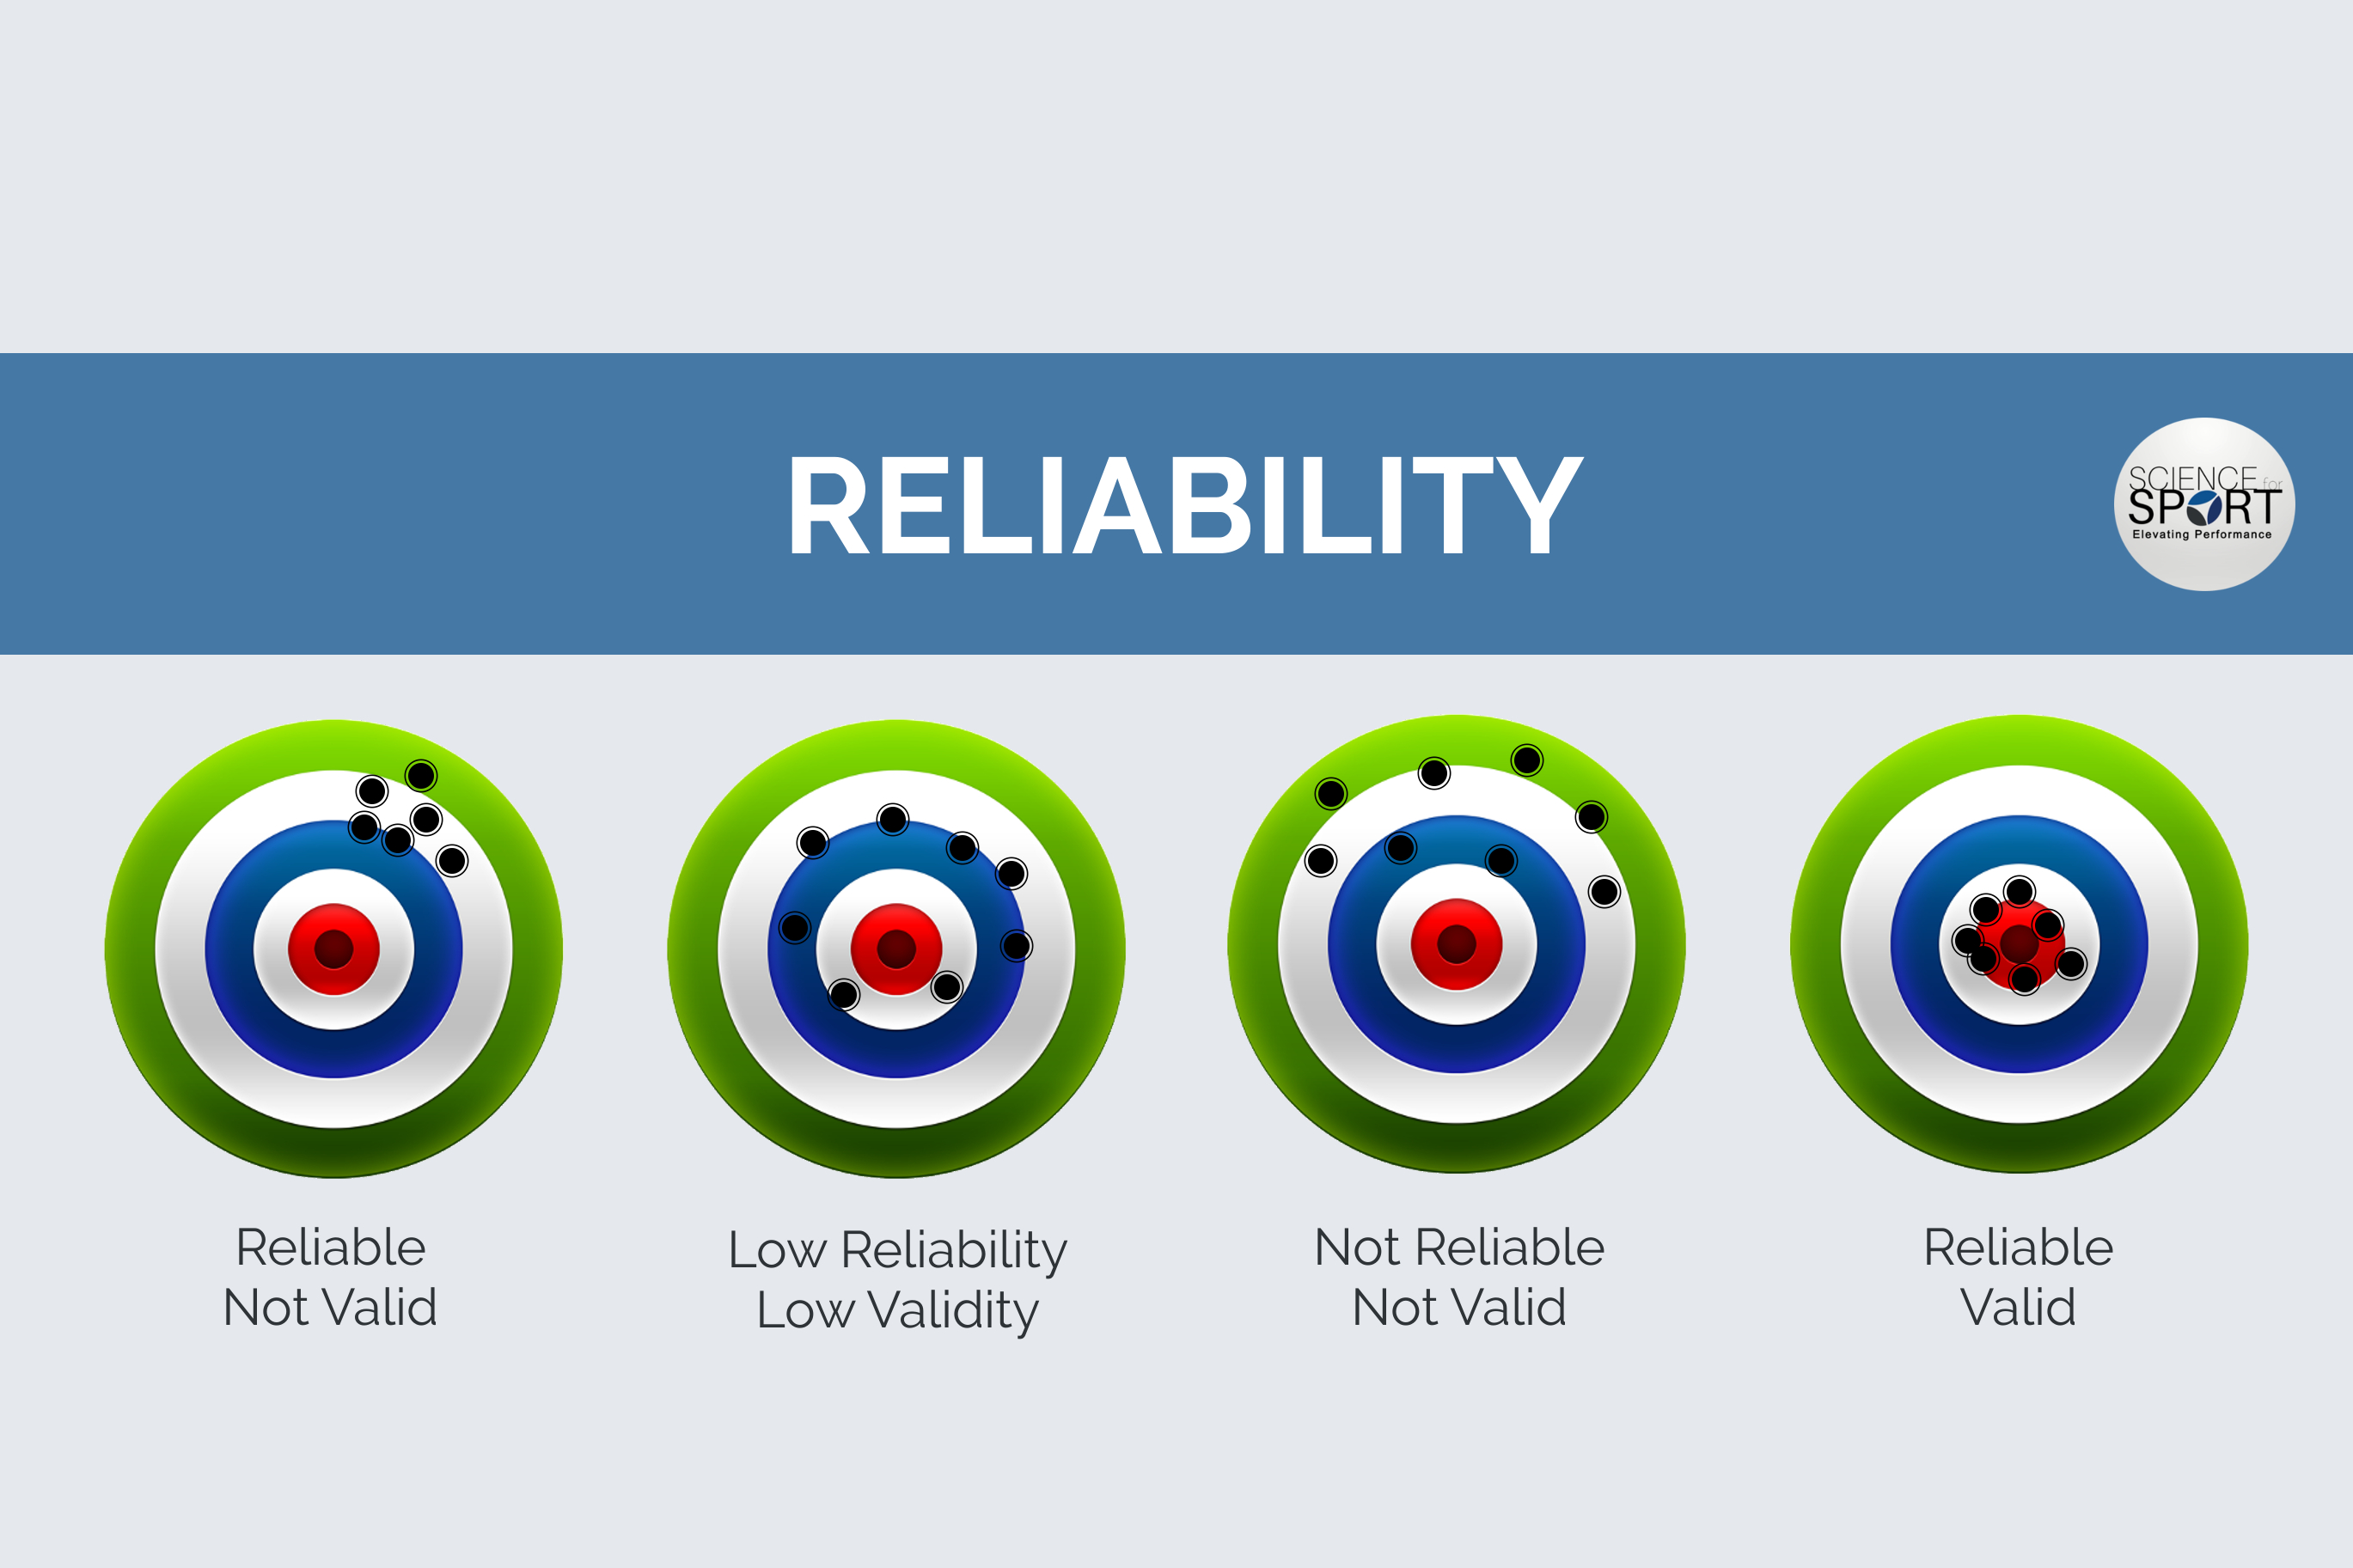 what is the difference between validity and reliability